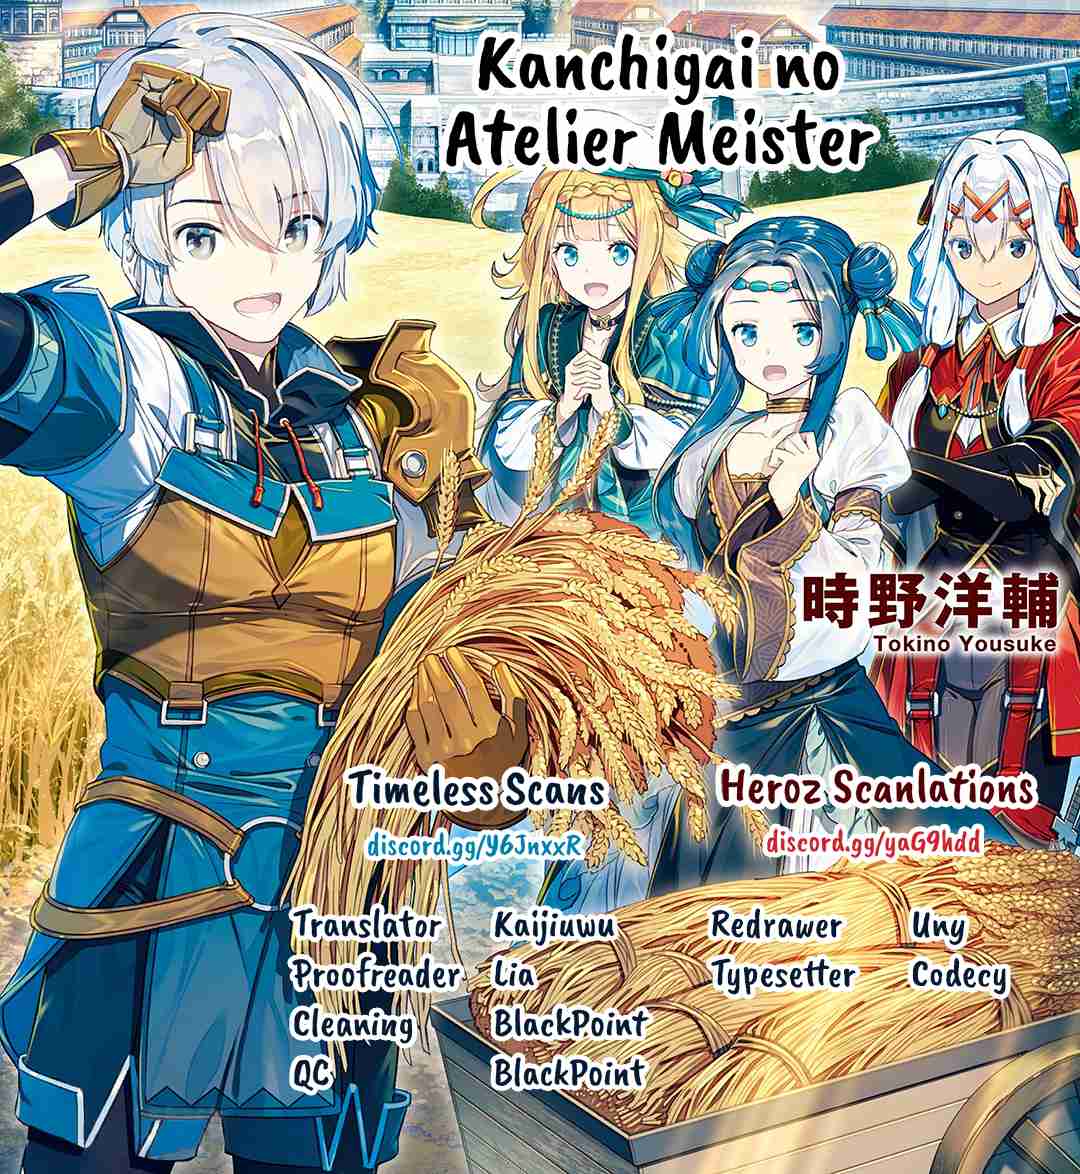 Kanchigai no Atelier Meister Ch. 5 The Atelier Meister